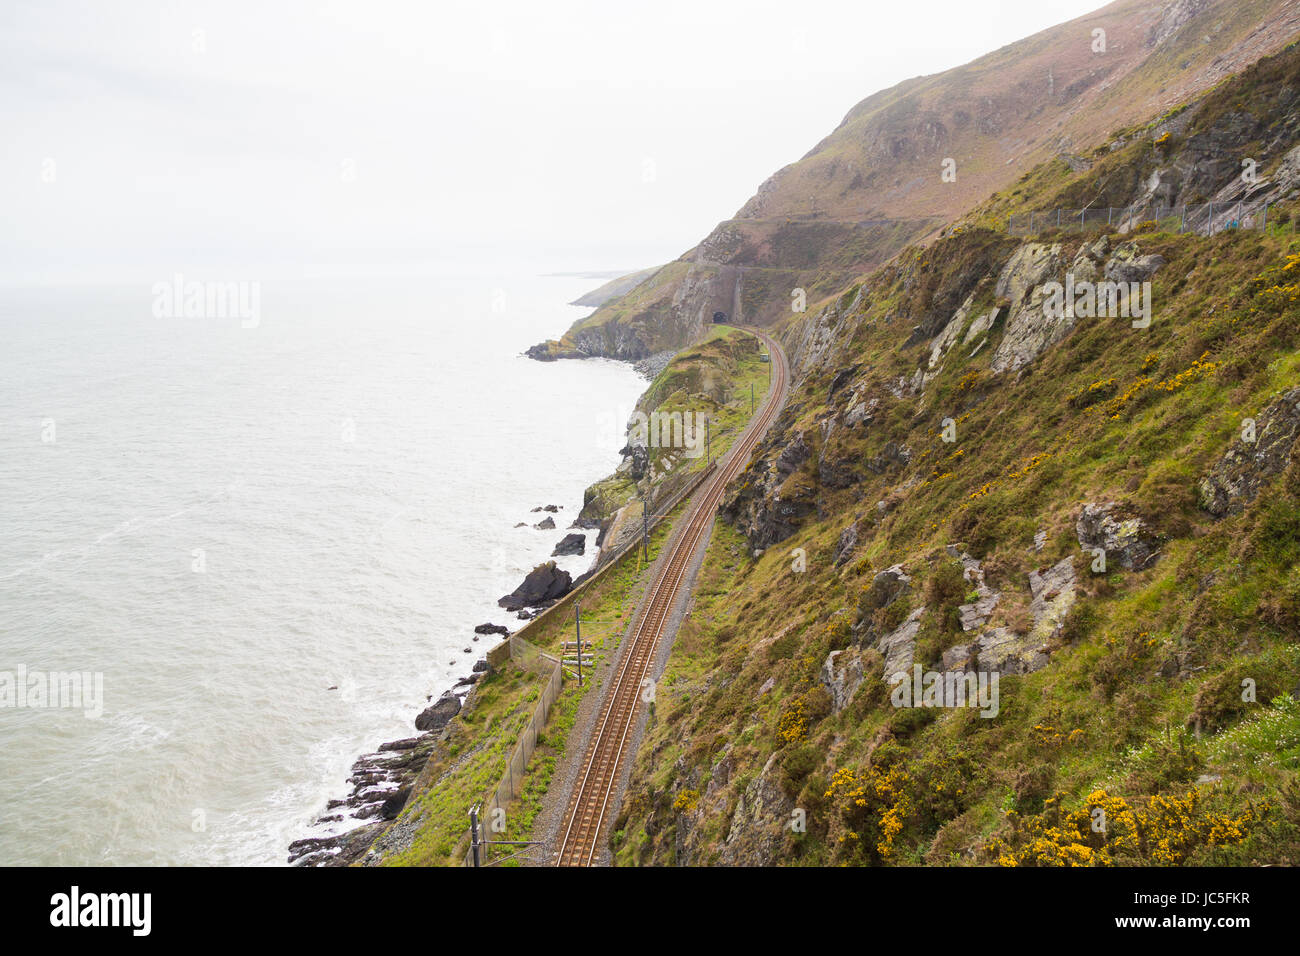 A view overlooking the coastline of Bray in Co. Wicklow, Ireland Stock Photo